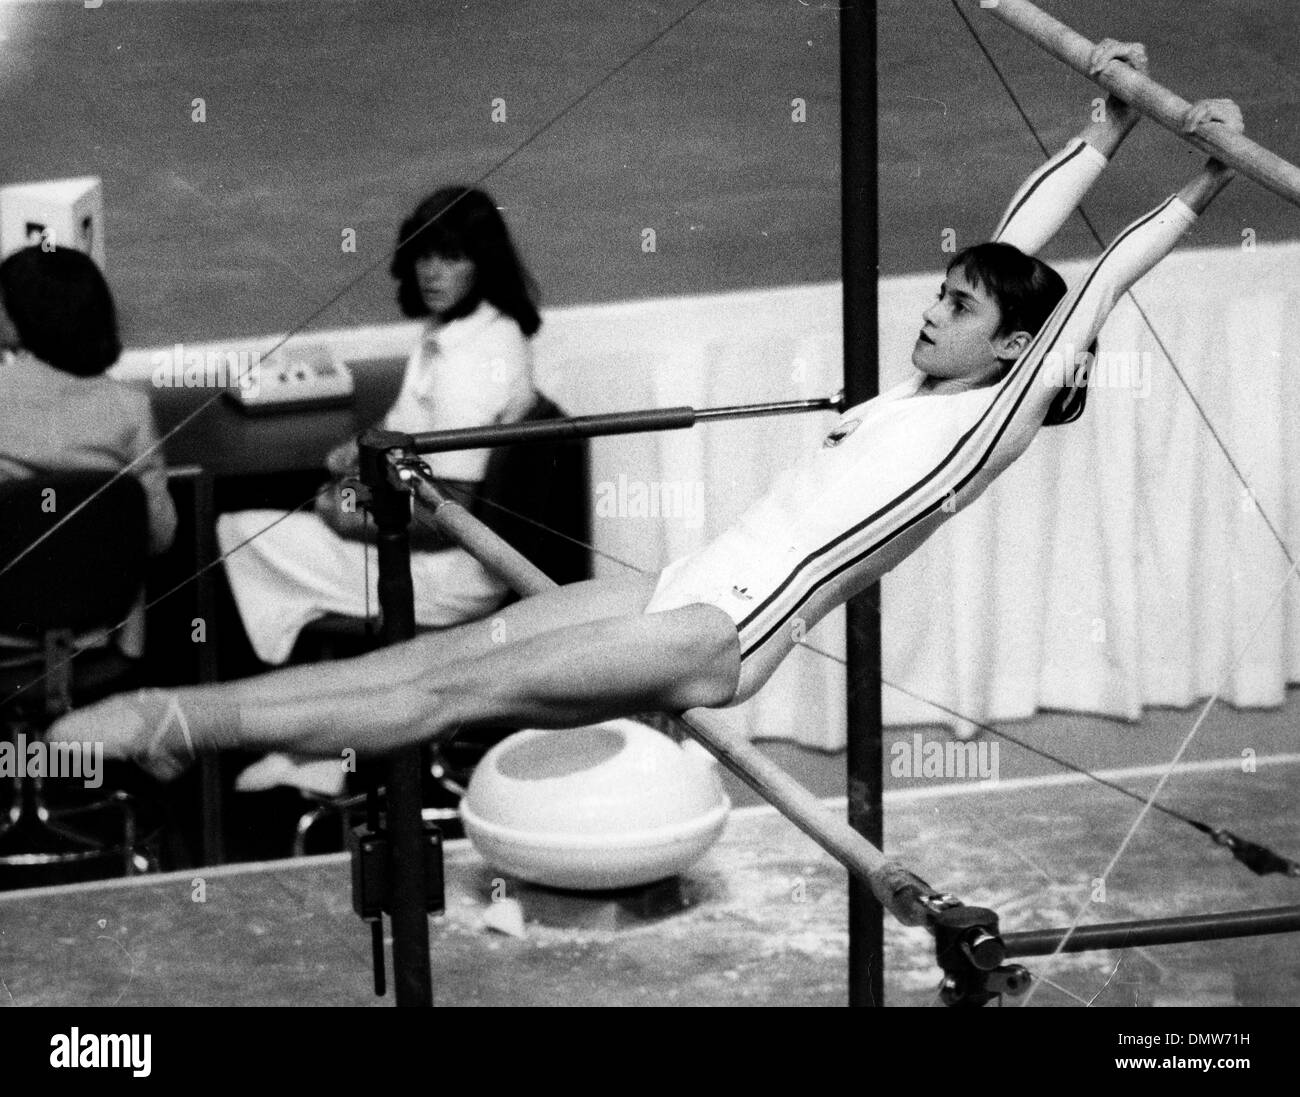 July 22, 1976 - Montreal, Canada - Fourteen year old gymnast NADIA COMANECI competing on the uneven barres at the 1976 Olympic Games in Montreal. (Credit Image: © KEYSTONE Pictures USA/ZUMAPRESS.com) Stock Photo